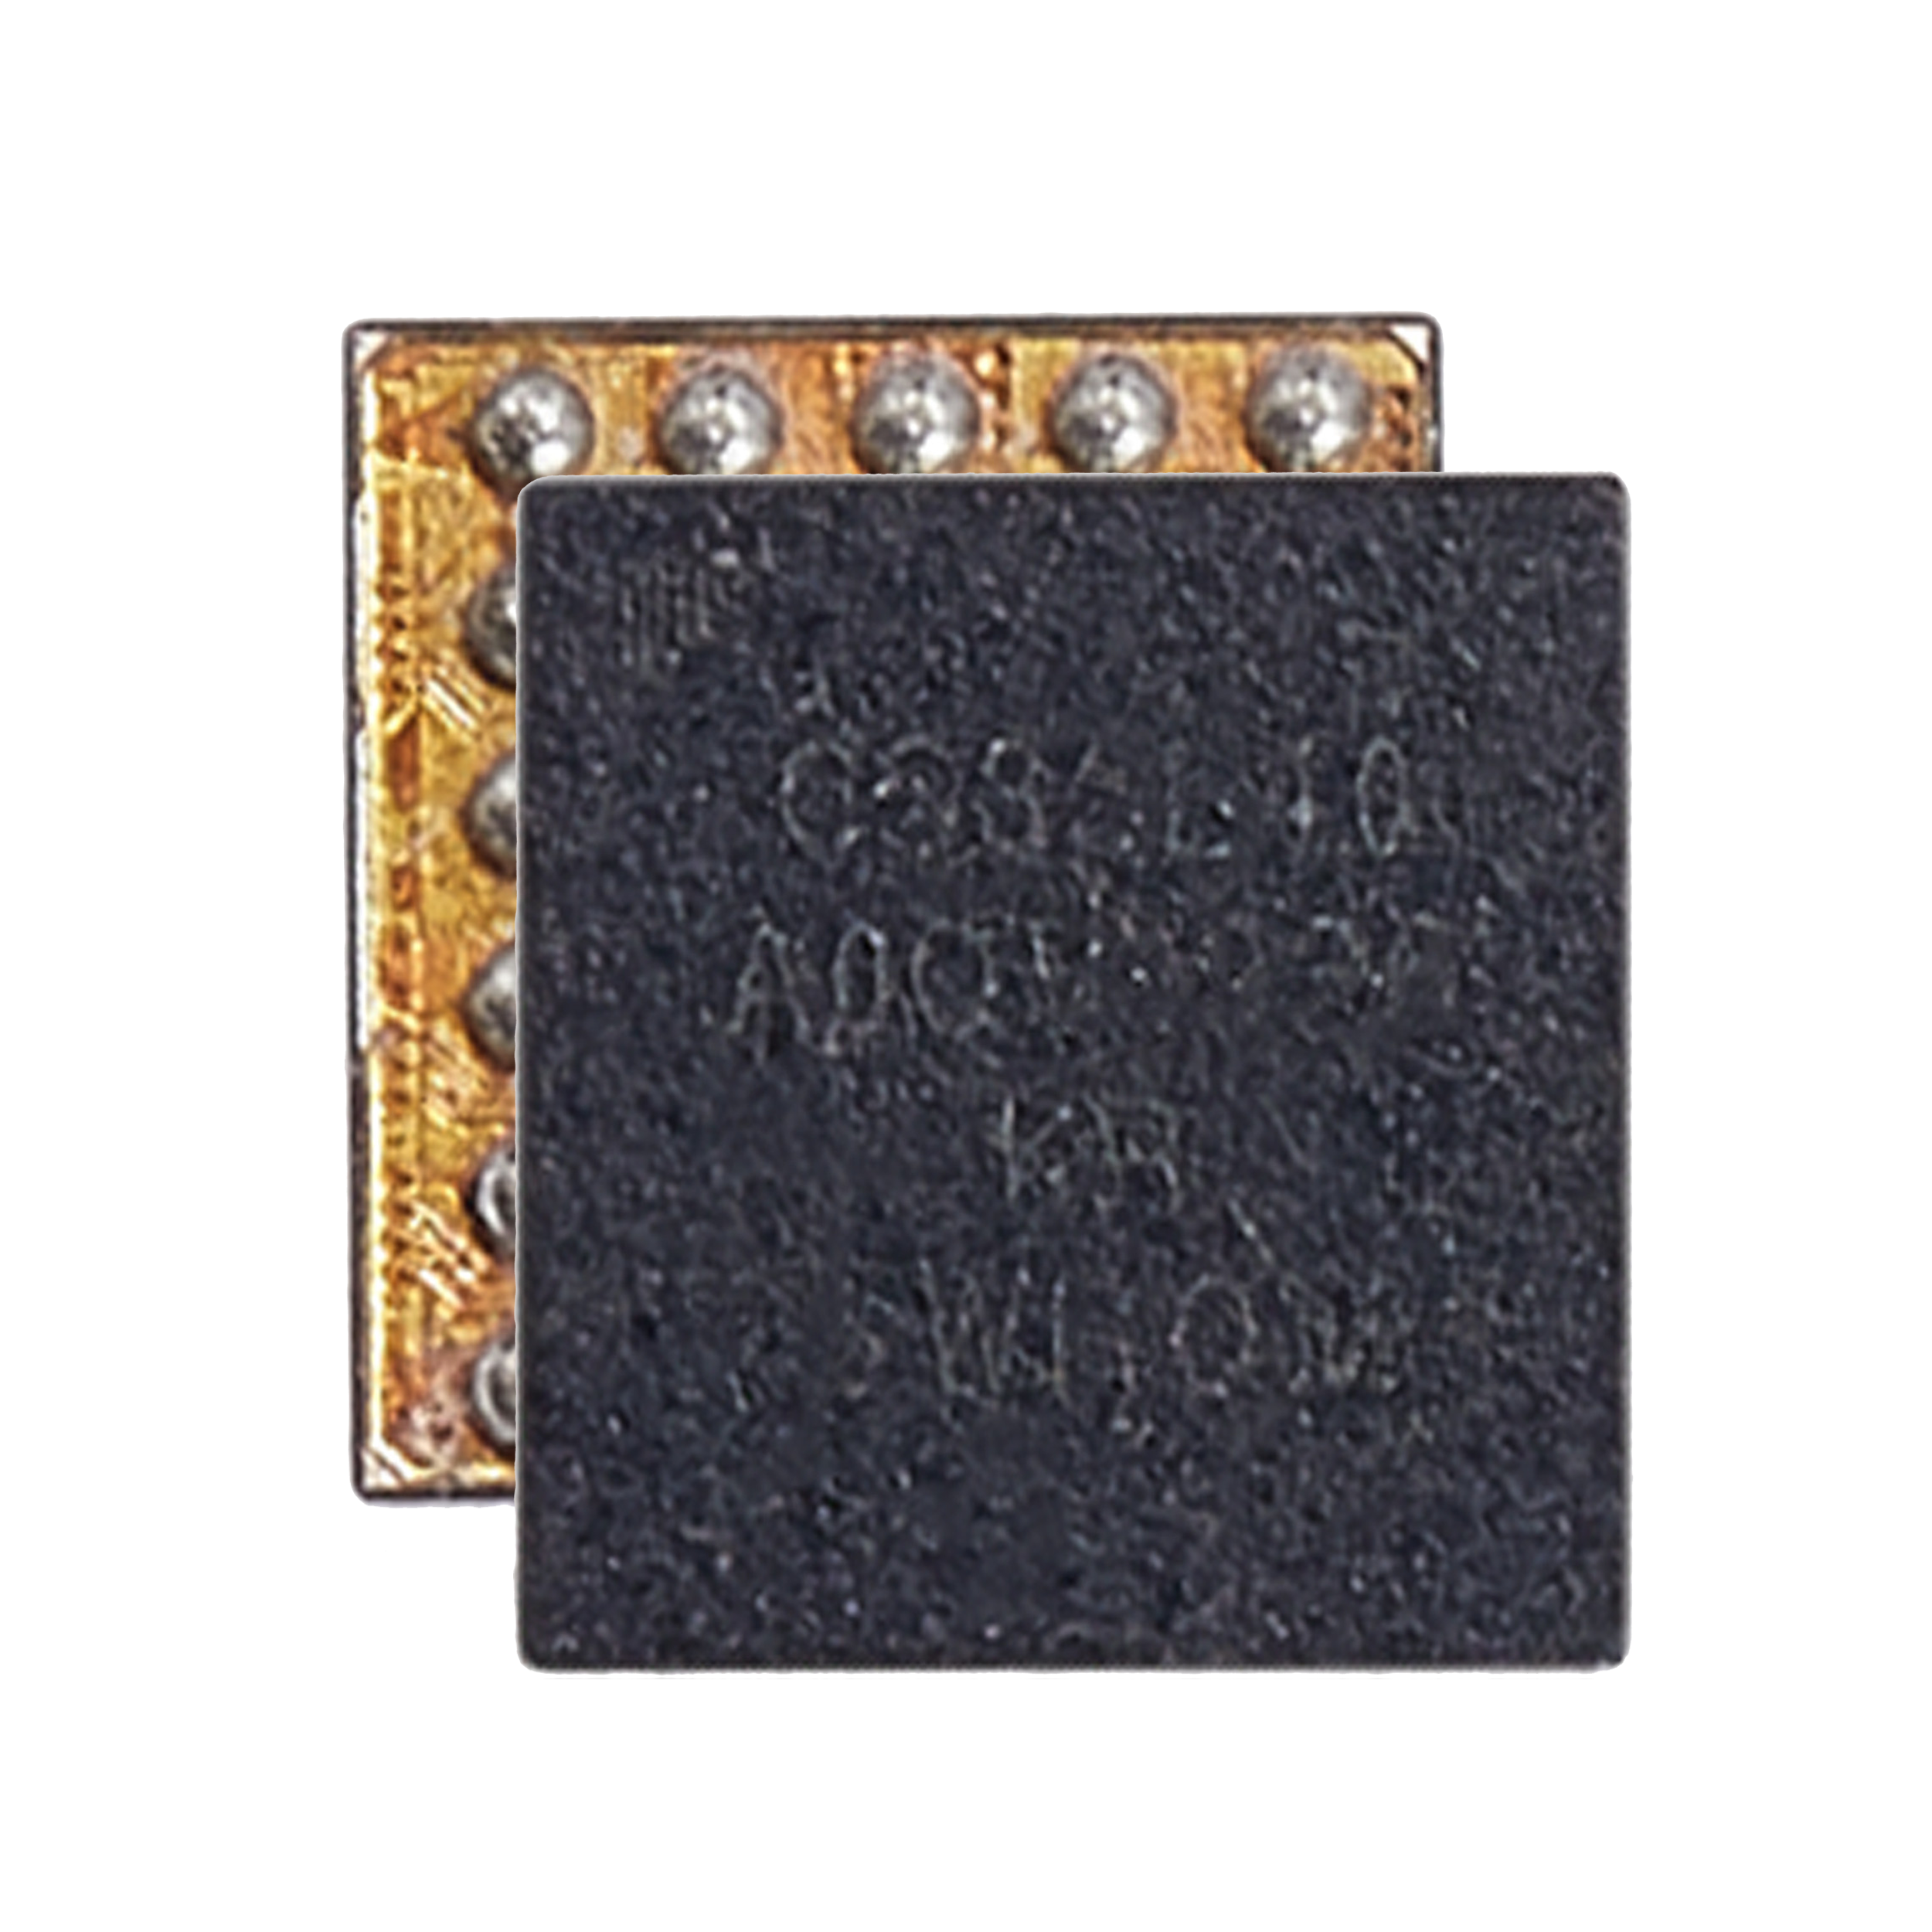 Audio Amplifier IC for Samsung Galaxy S22 Ultra